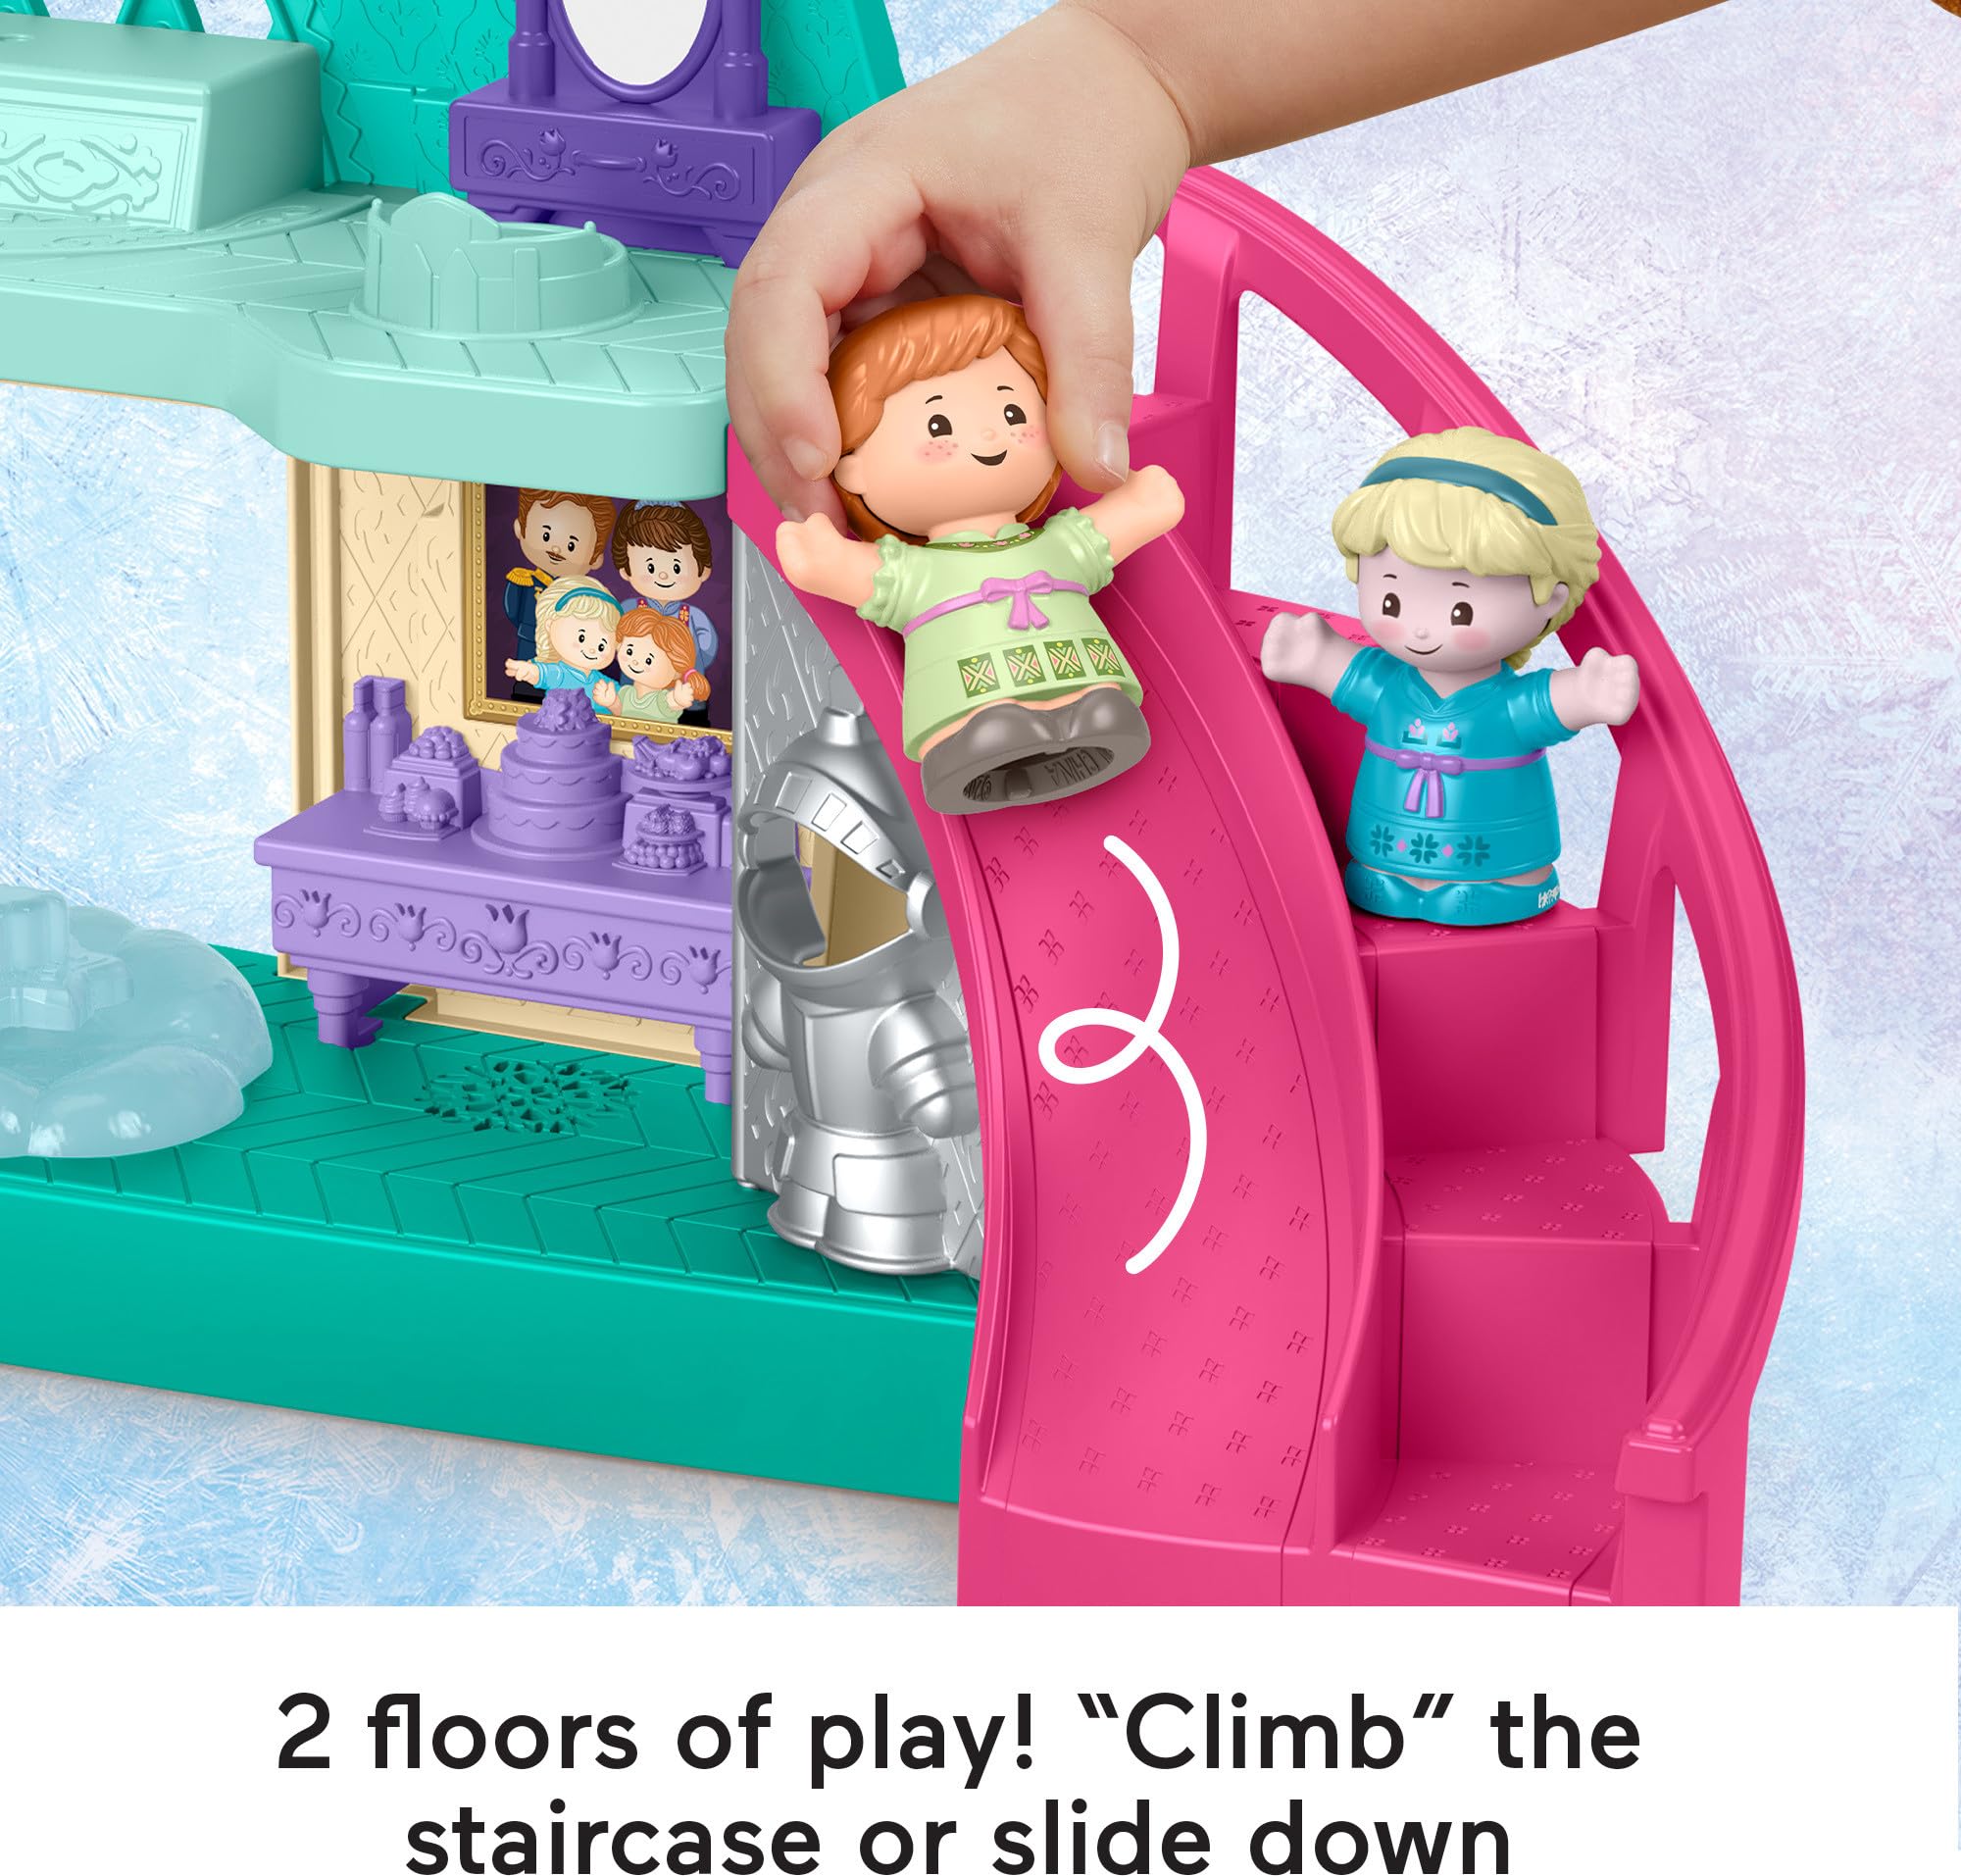 Fisher-Price Little People Toddler Playset Disney Frozen Arendelle Castle with Lights Sounds Anna & Elsa Figures for Ages 18+ Months (Amazon Exclusive)